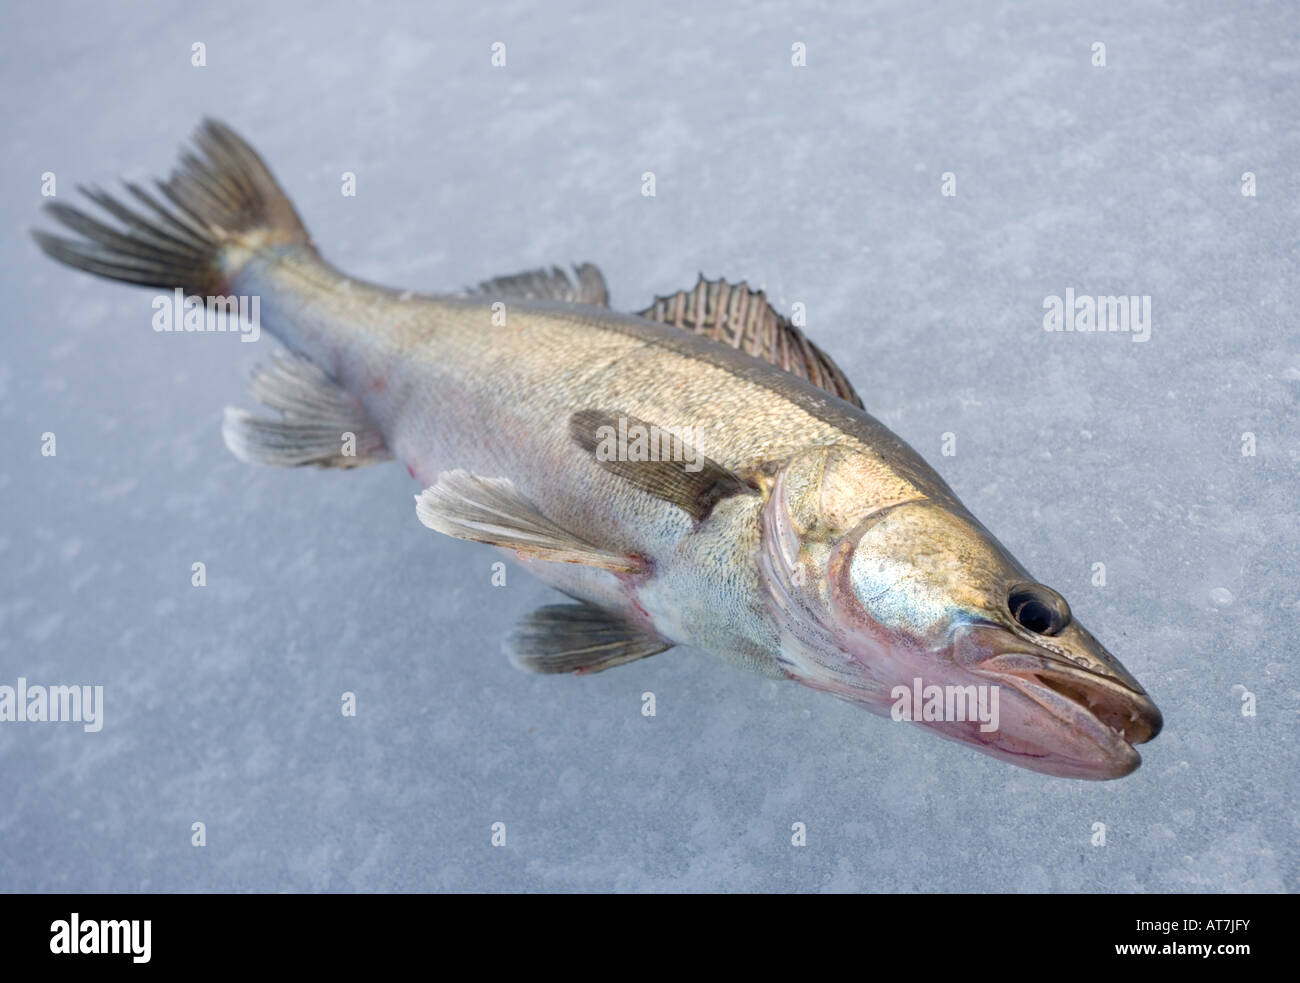 Close-up of a freshly caught alive European/Finnish freshwater pikeperch ( Sander lucioperca ) on ice , Finland Stock Photo